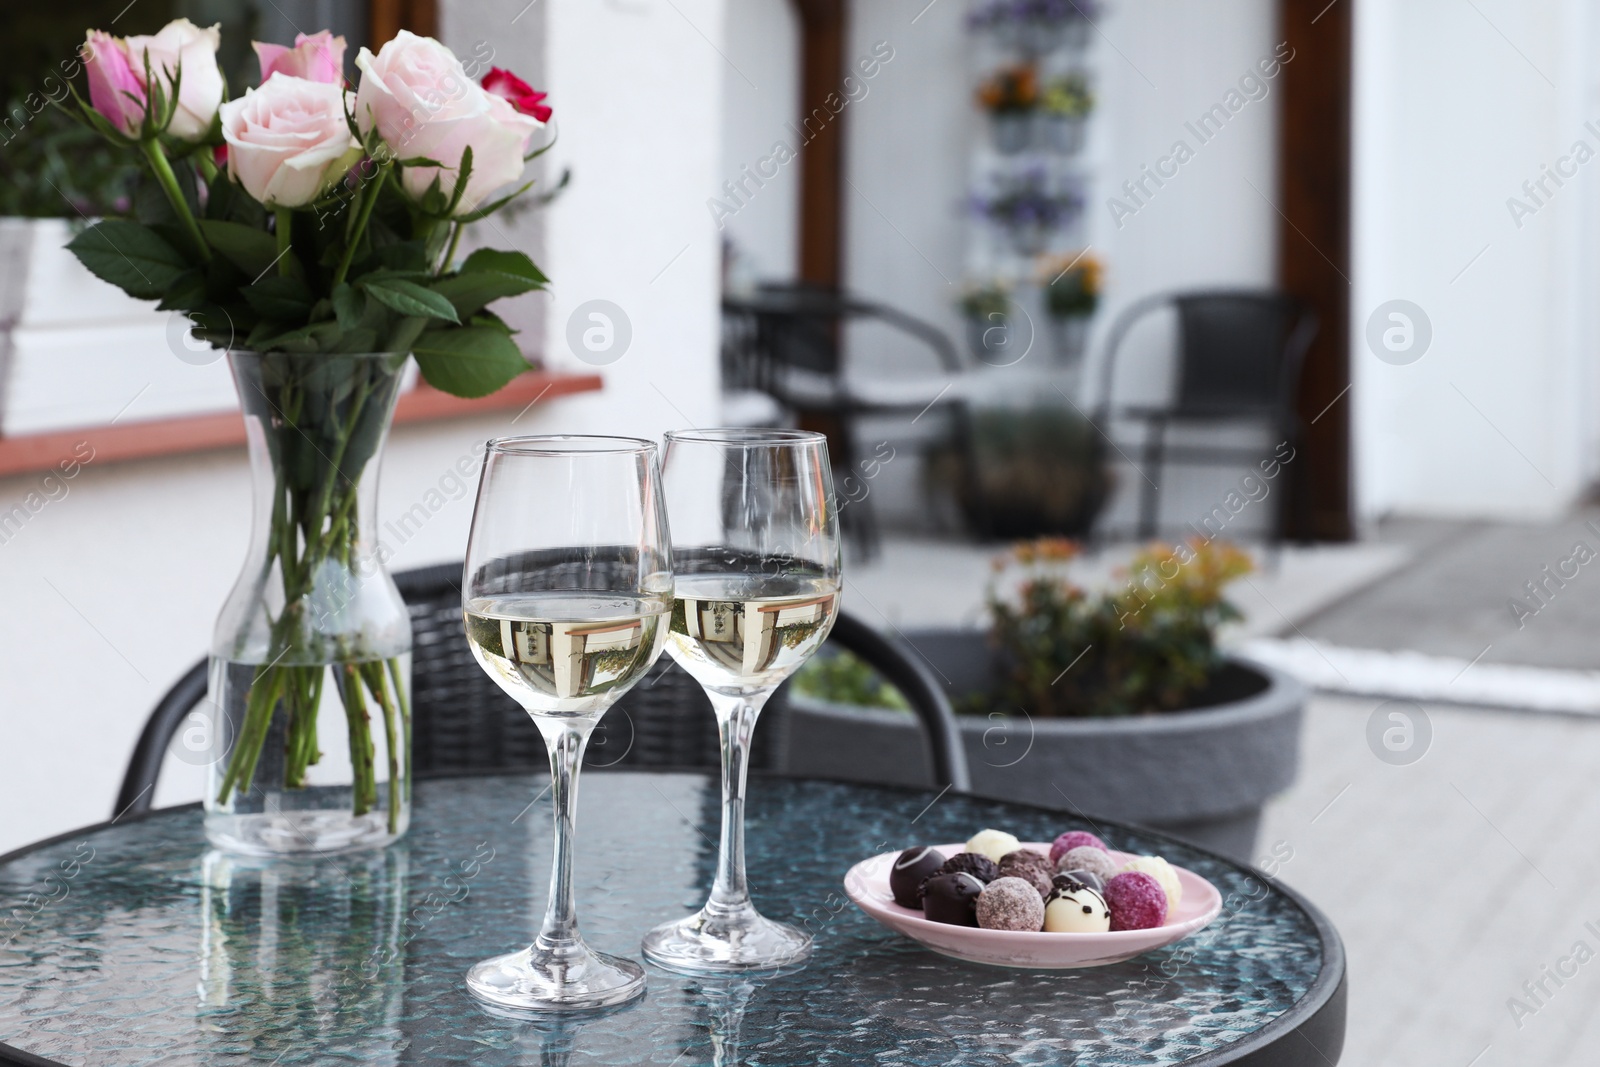 Photo of Vase with roses, glasses of wine and candies on glass table near house on outdoor terrace